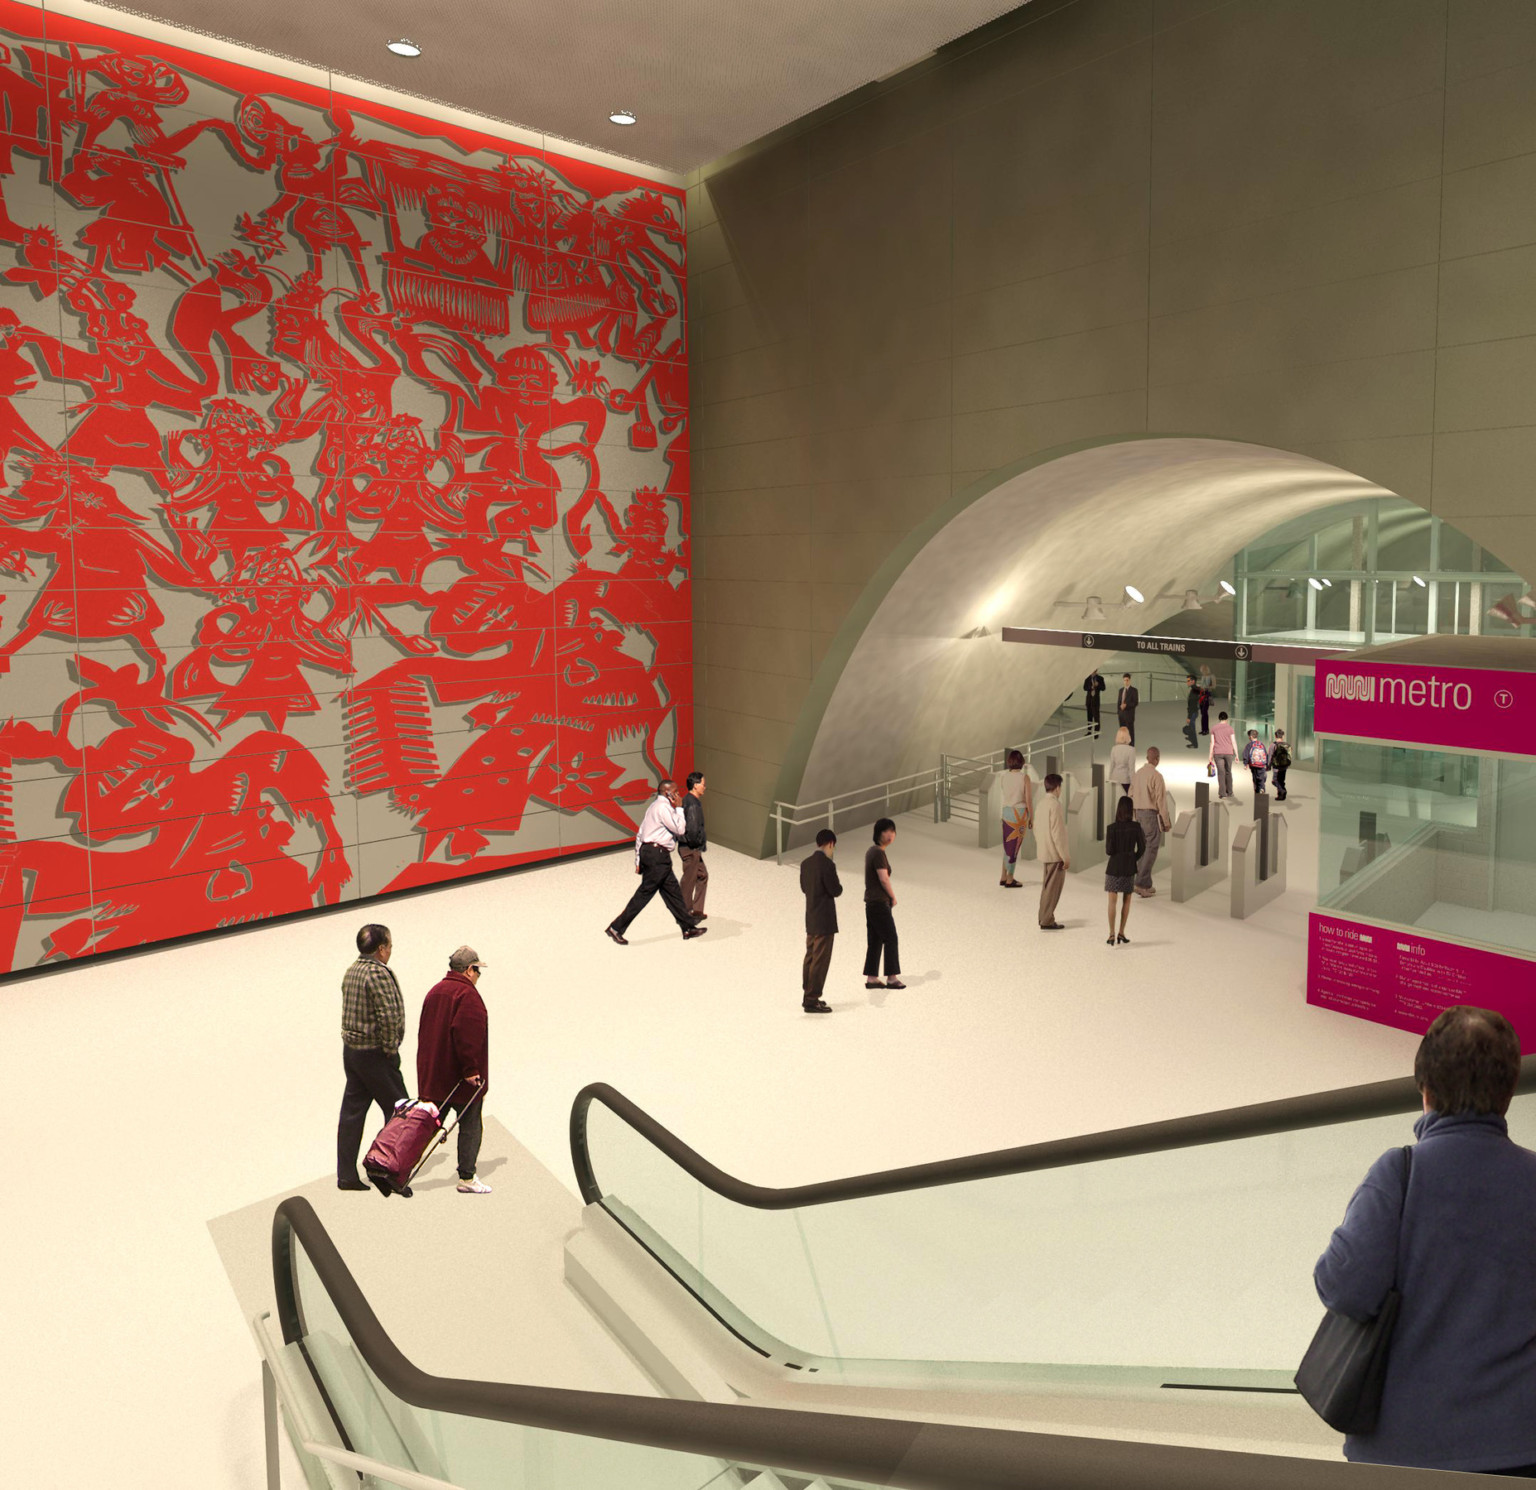 Concrete block walls with raised red sculptural mural on left. Right, arched hall with gates and ticket booth by escalators